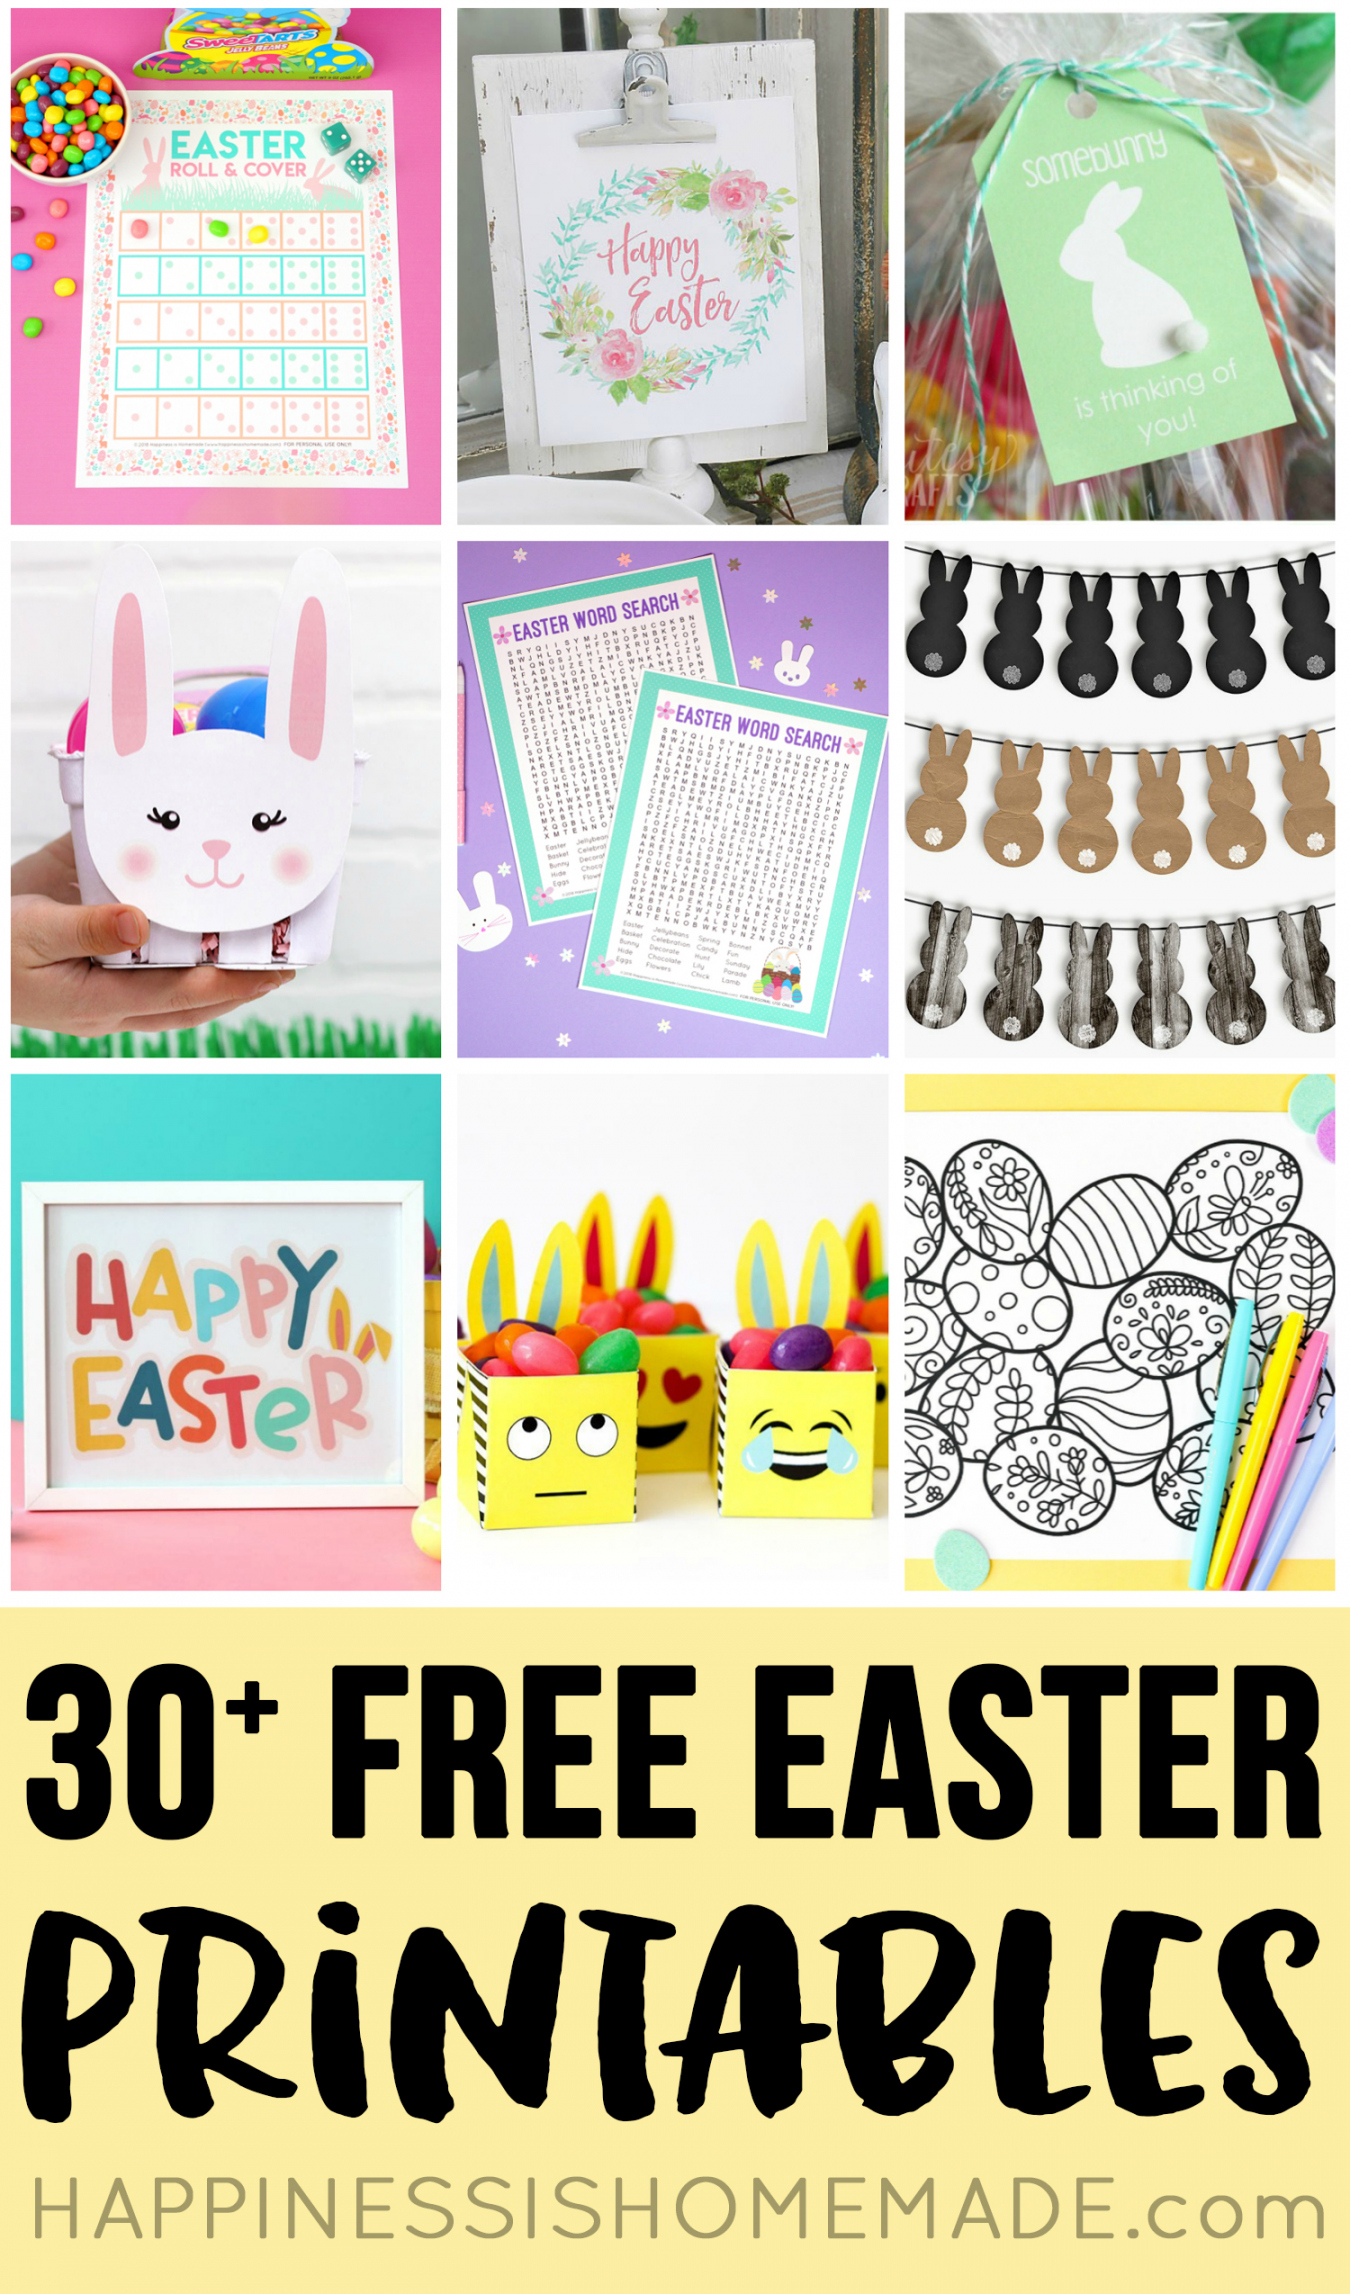 Free Printables For Easter - Printable - + Totally Free Easter Printables - Happiness is Homemade